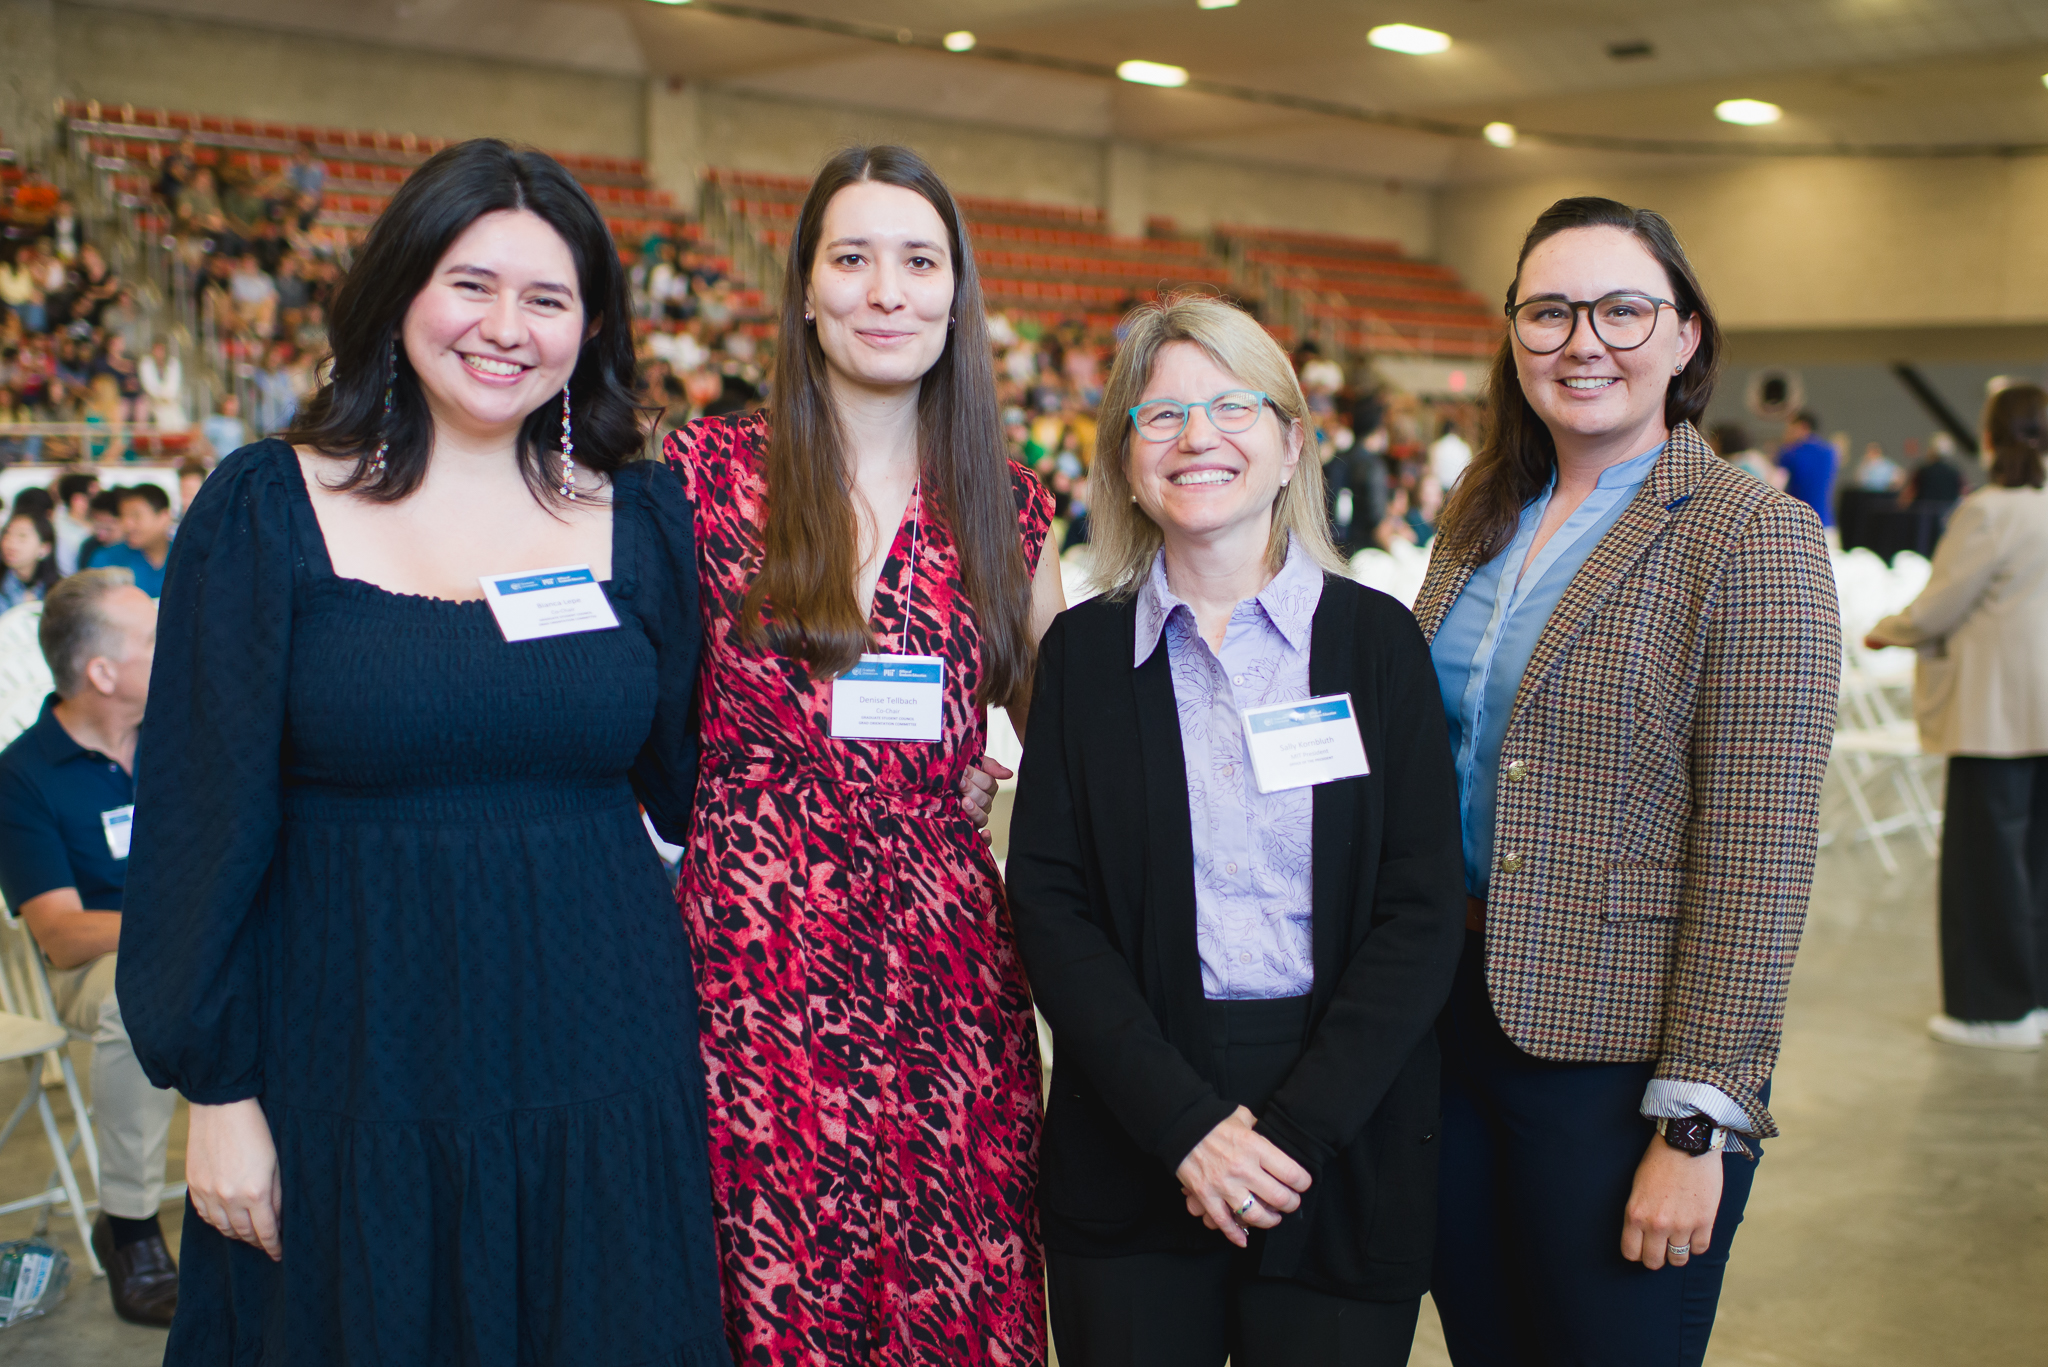 Three graduate students stand with MIT President Sally Kornbluth at an Orientation event. All are smiling.